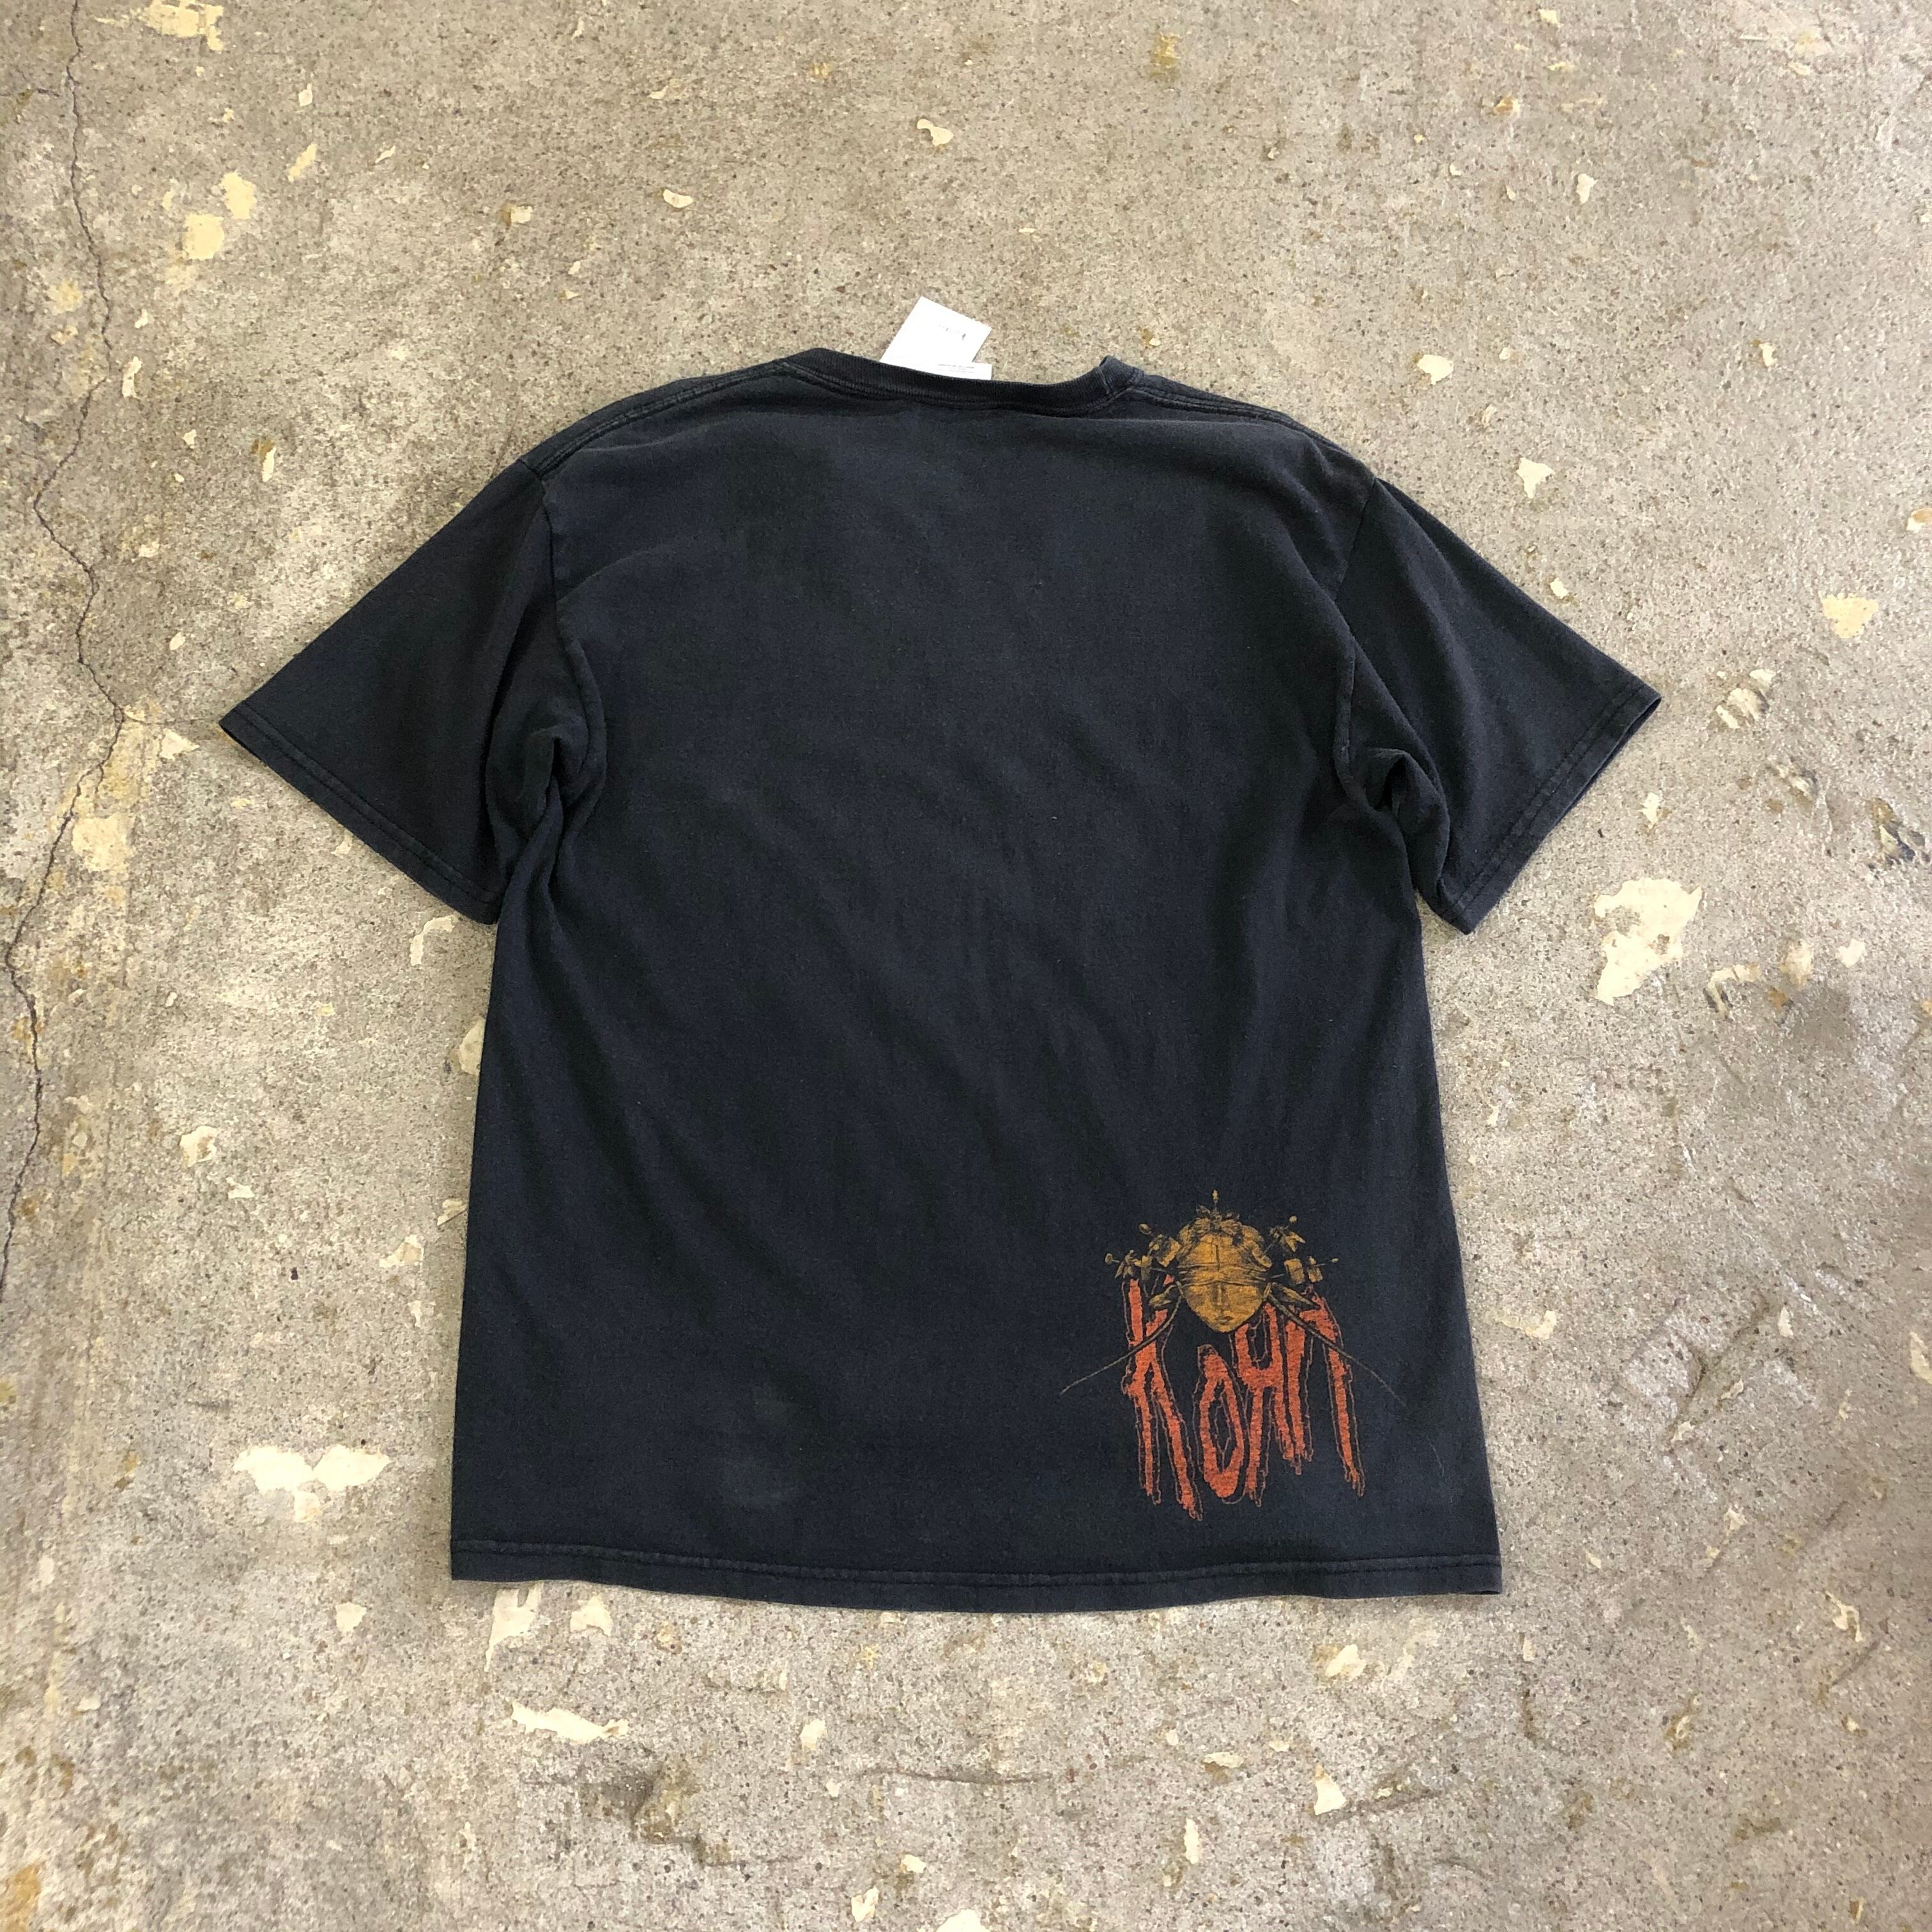 00s Korn T-shirt | What’z up powered by BASE